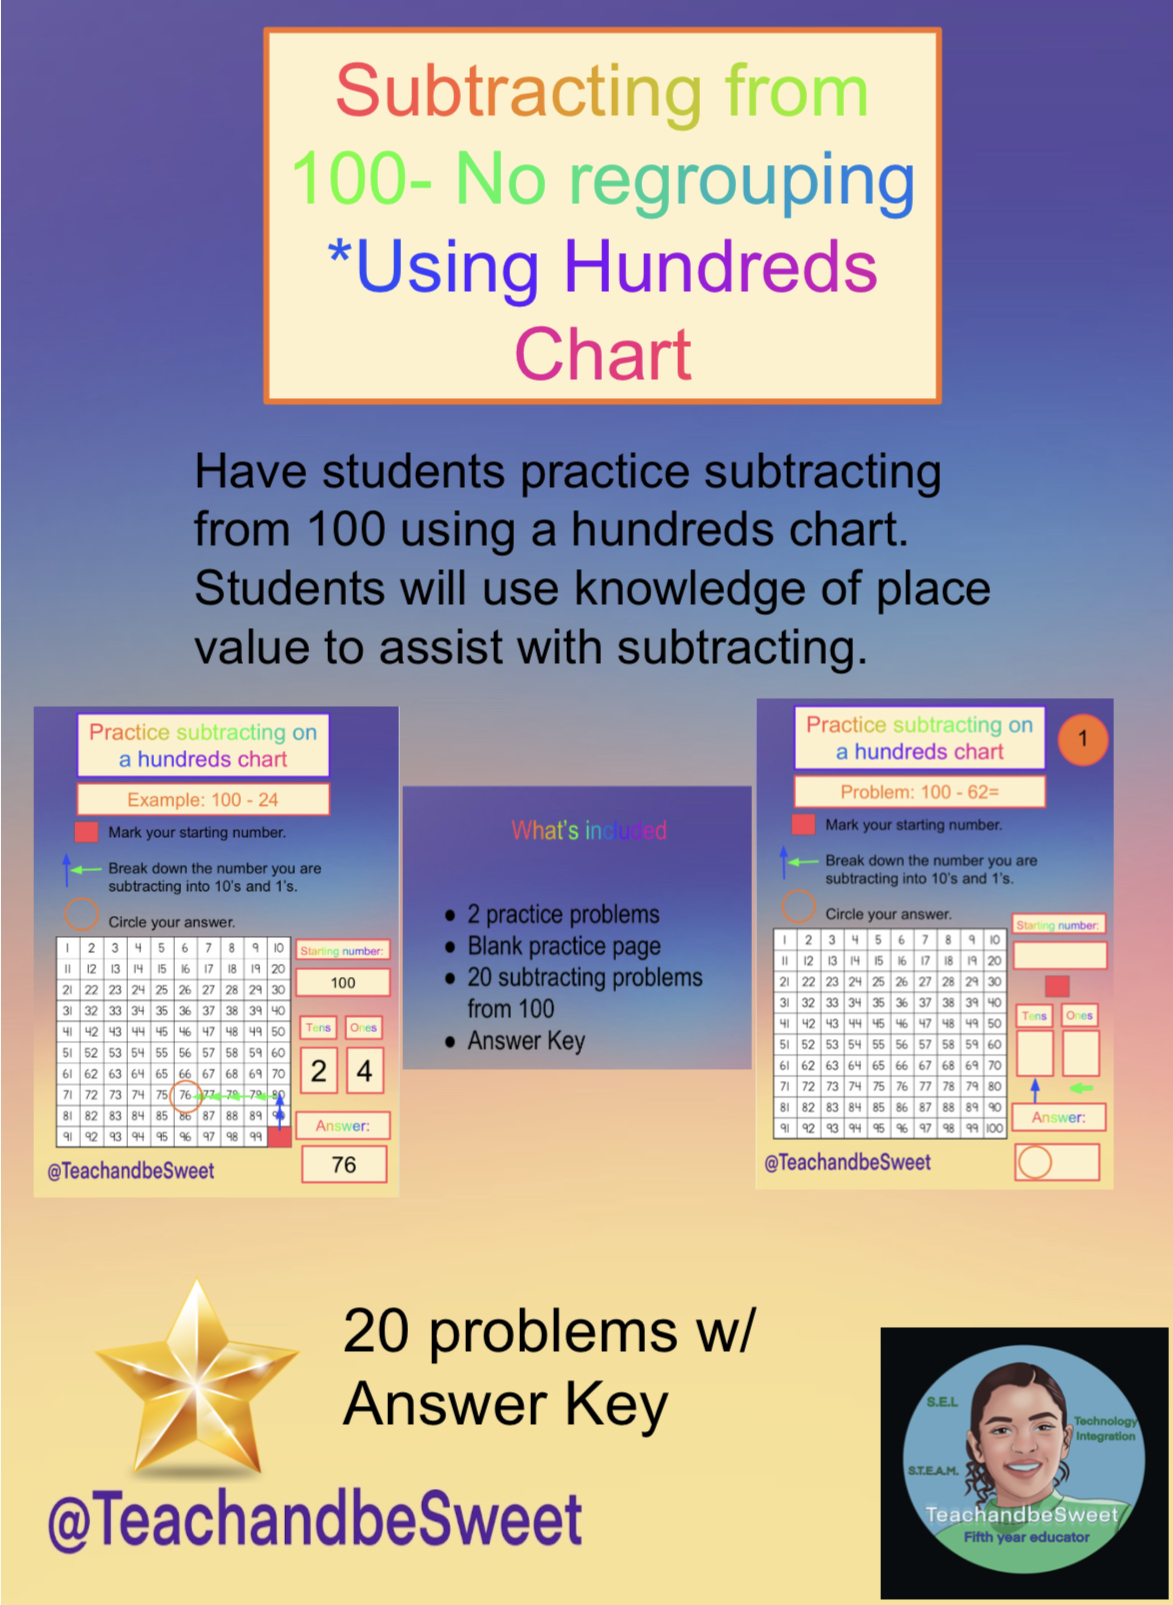 Subtracting from 100 on a hundreds chart- Digital Activity